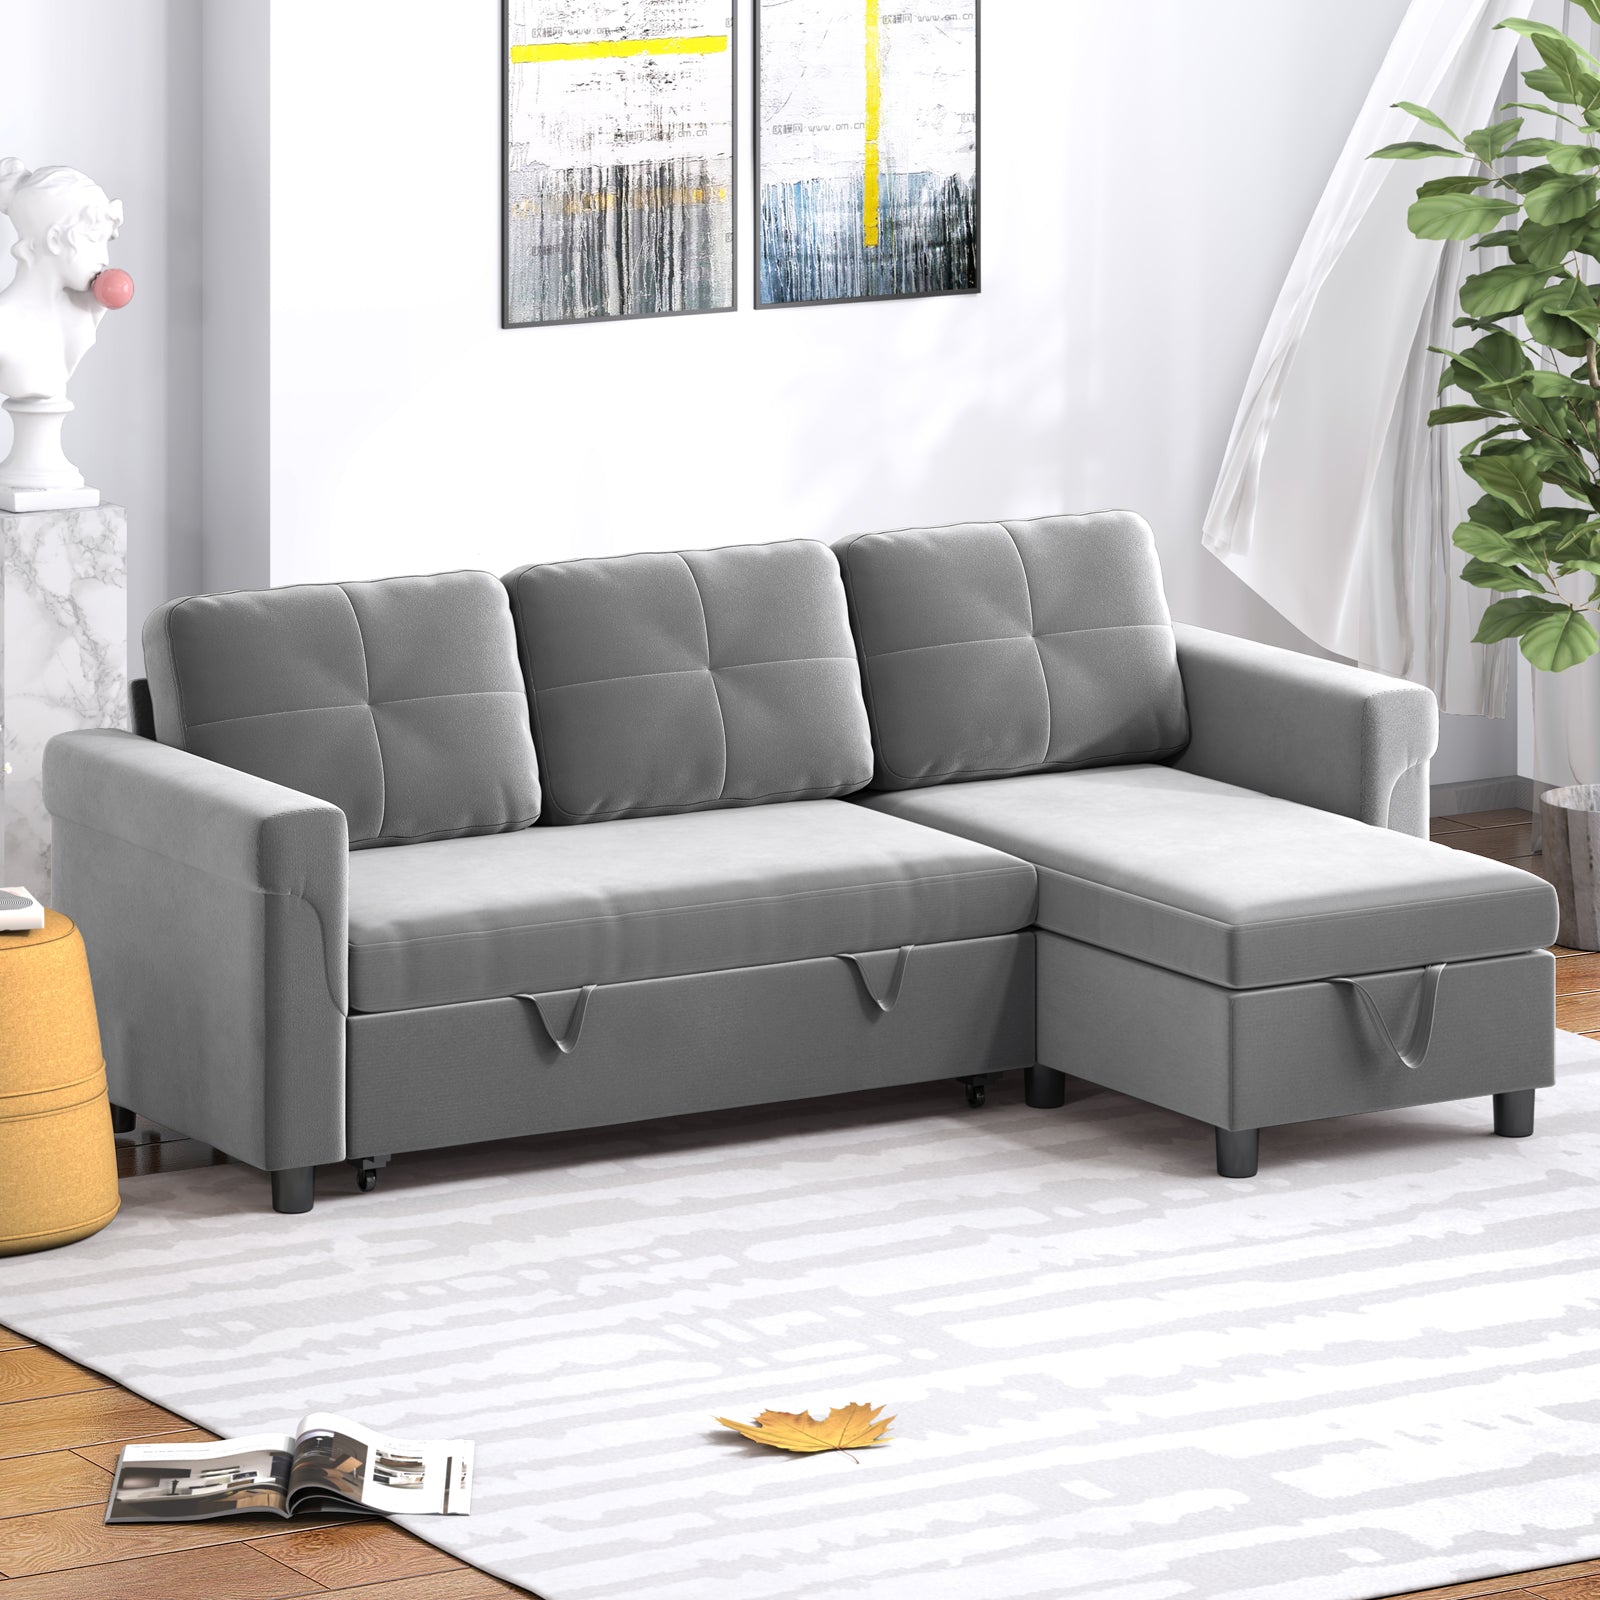 Mjkone 2-Piece L Shaped Upholstered Sectional Sofa Bed With Chaise